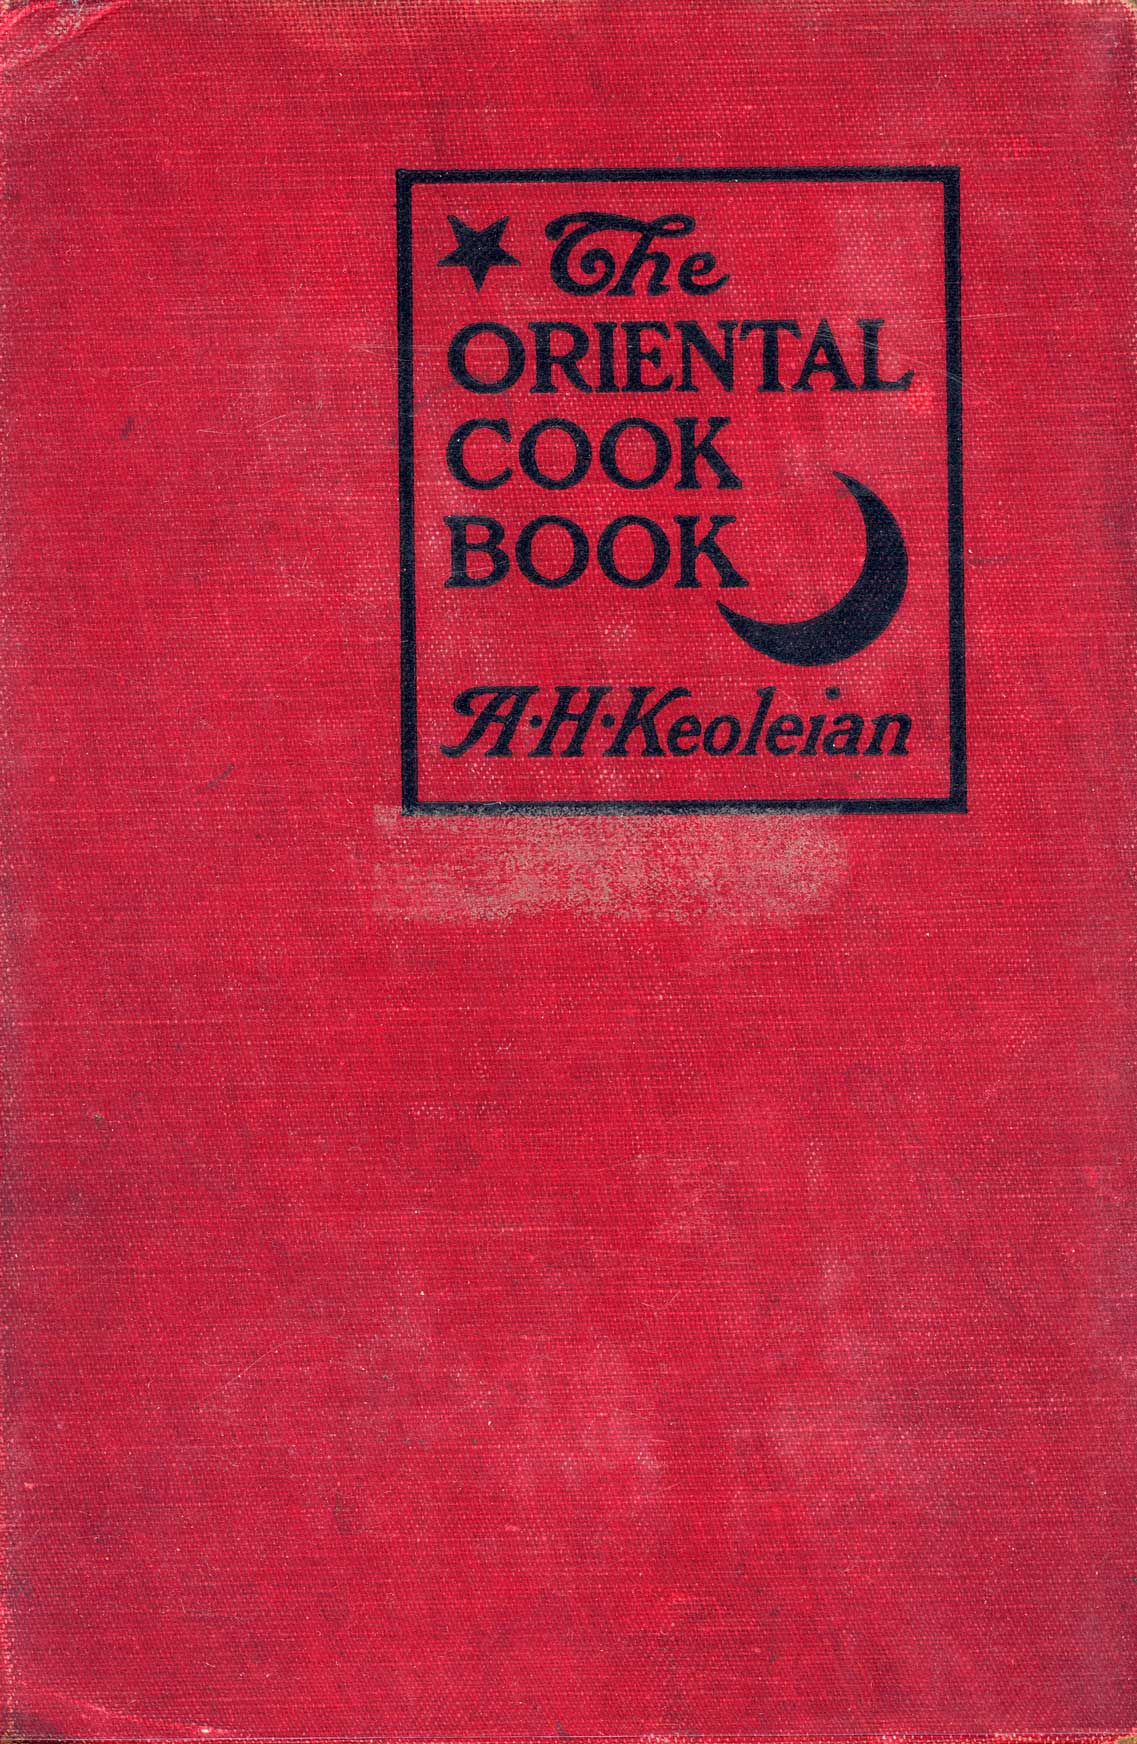 The oriental cook book : wholesome, dainty and economical dishes of the Orient, especially adapted to American tastes and methods of preparation